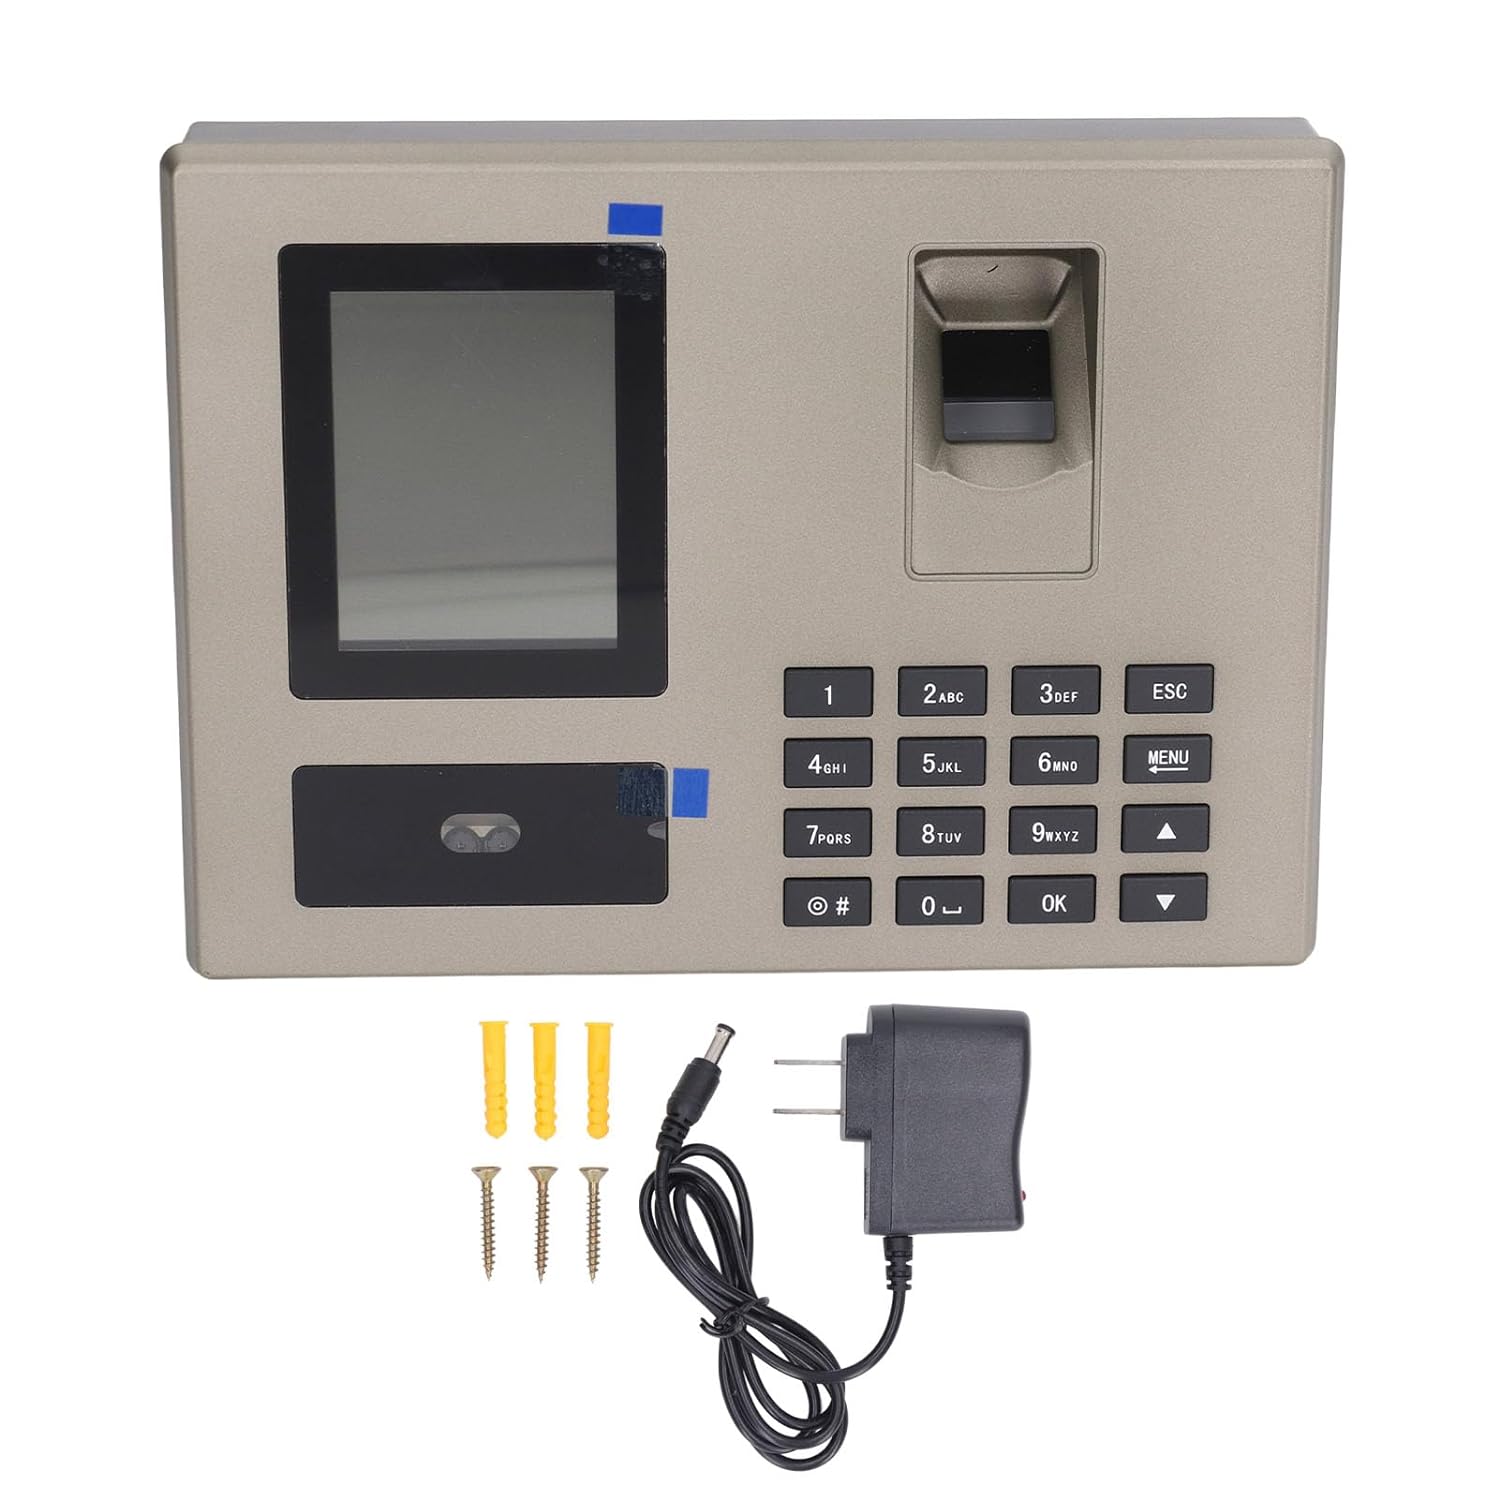 Time Clocks for Employees Small Business, Face Recognition Biometric Fingerprint Attendance Machine, Office Time Card Machine with PIN Punching, Time Attendance Clock (US Plug)